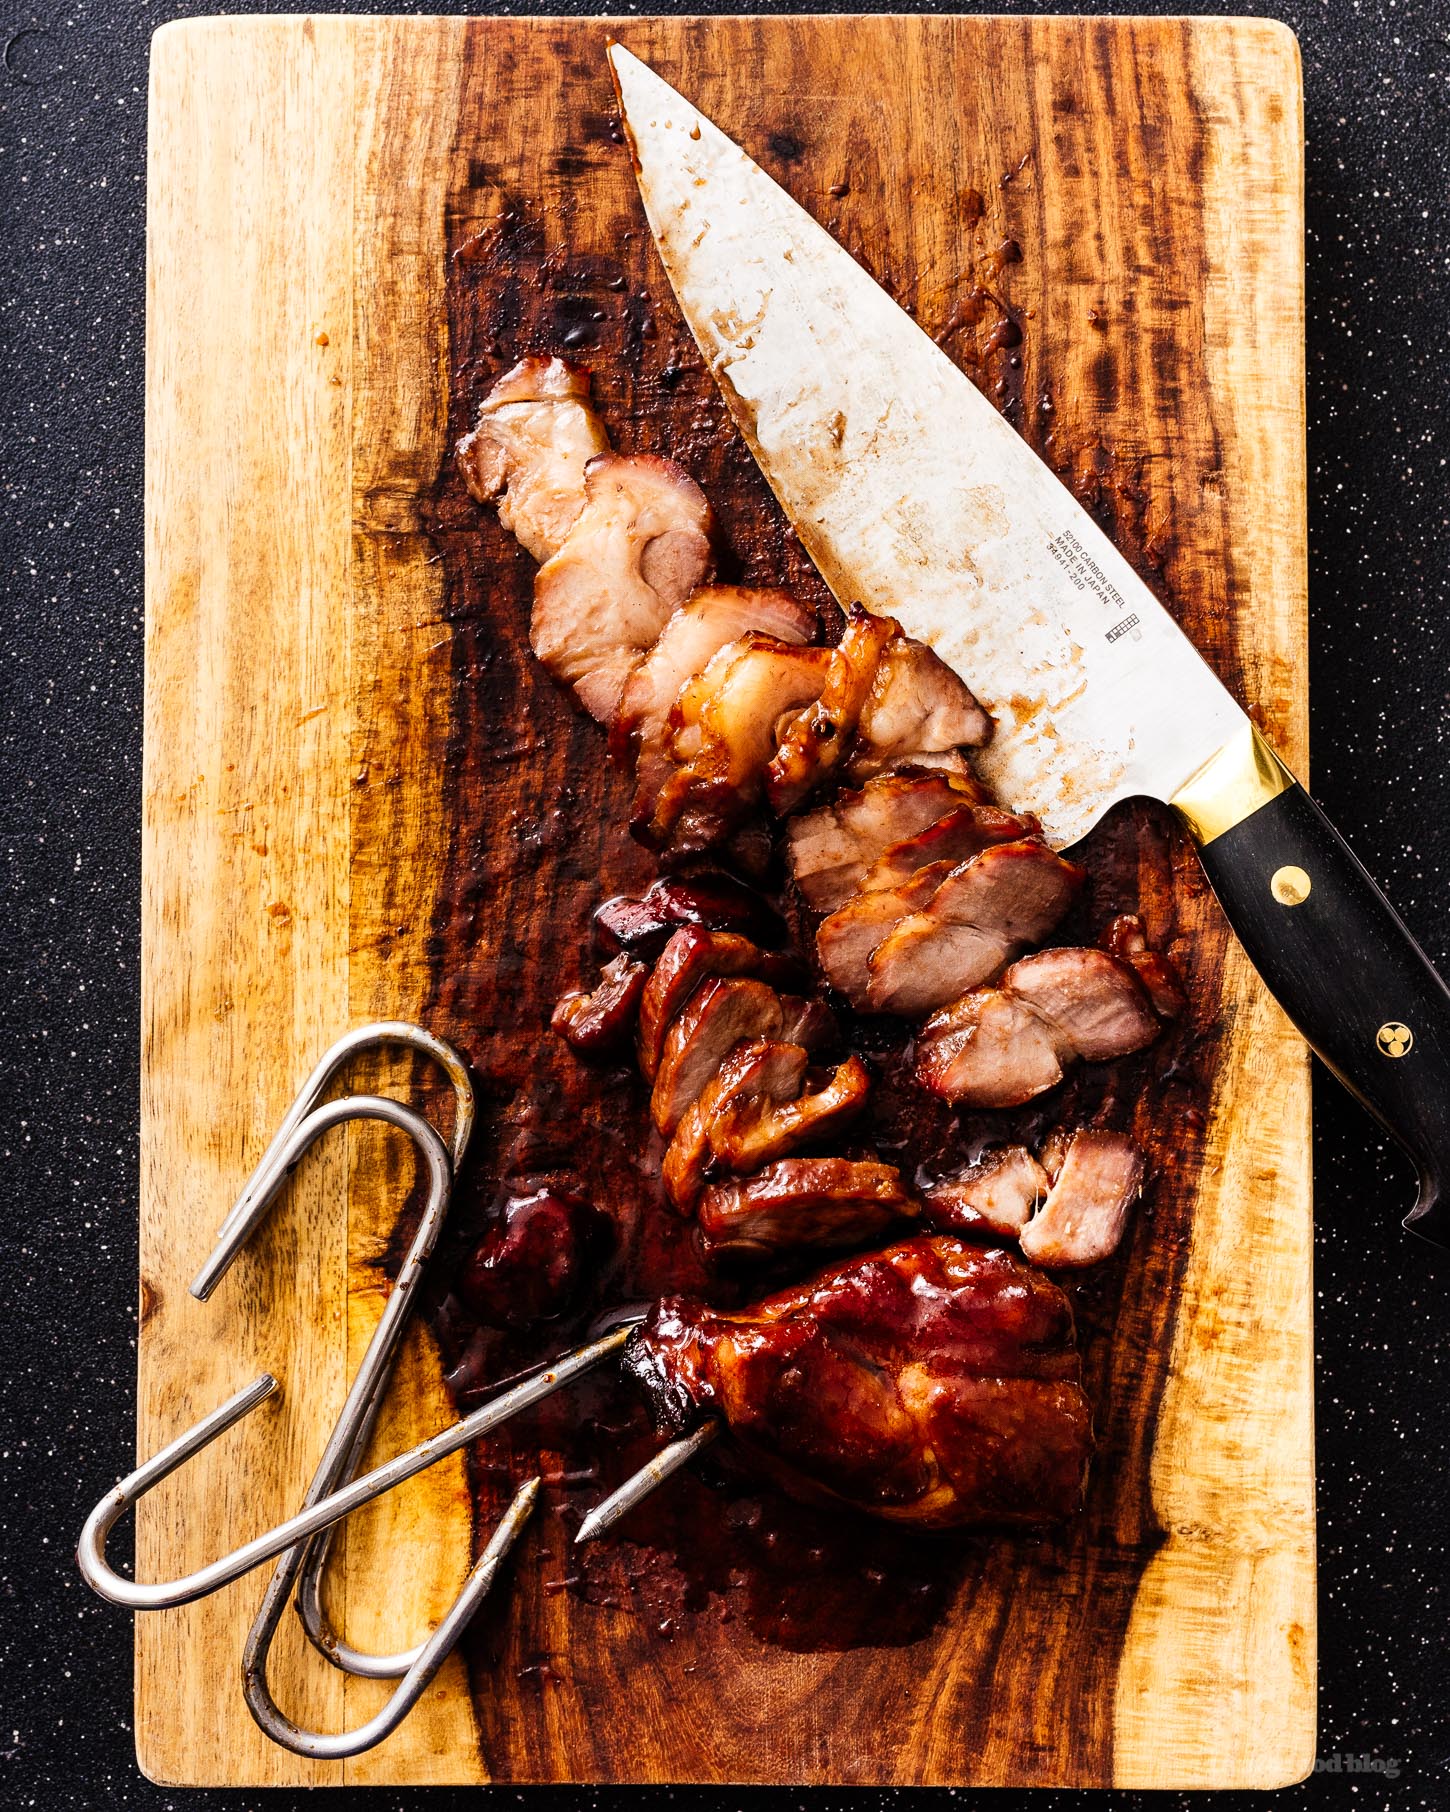 How to make Sweet and Sticky Char Siu (Chinese BBQ Pork). If you love juicy, sweet & sticky Chinese BBQ pork aka char siu deliciously glazed pork, give this recipe a try! #charsiu #chinese #recipes #dinner #pork #chinesebbqpork